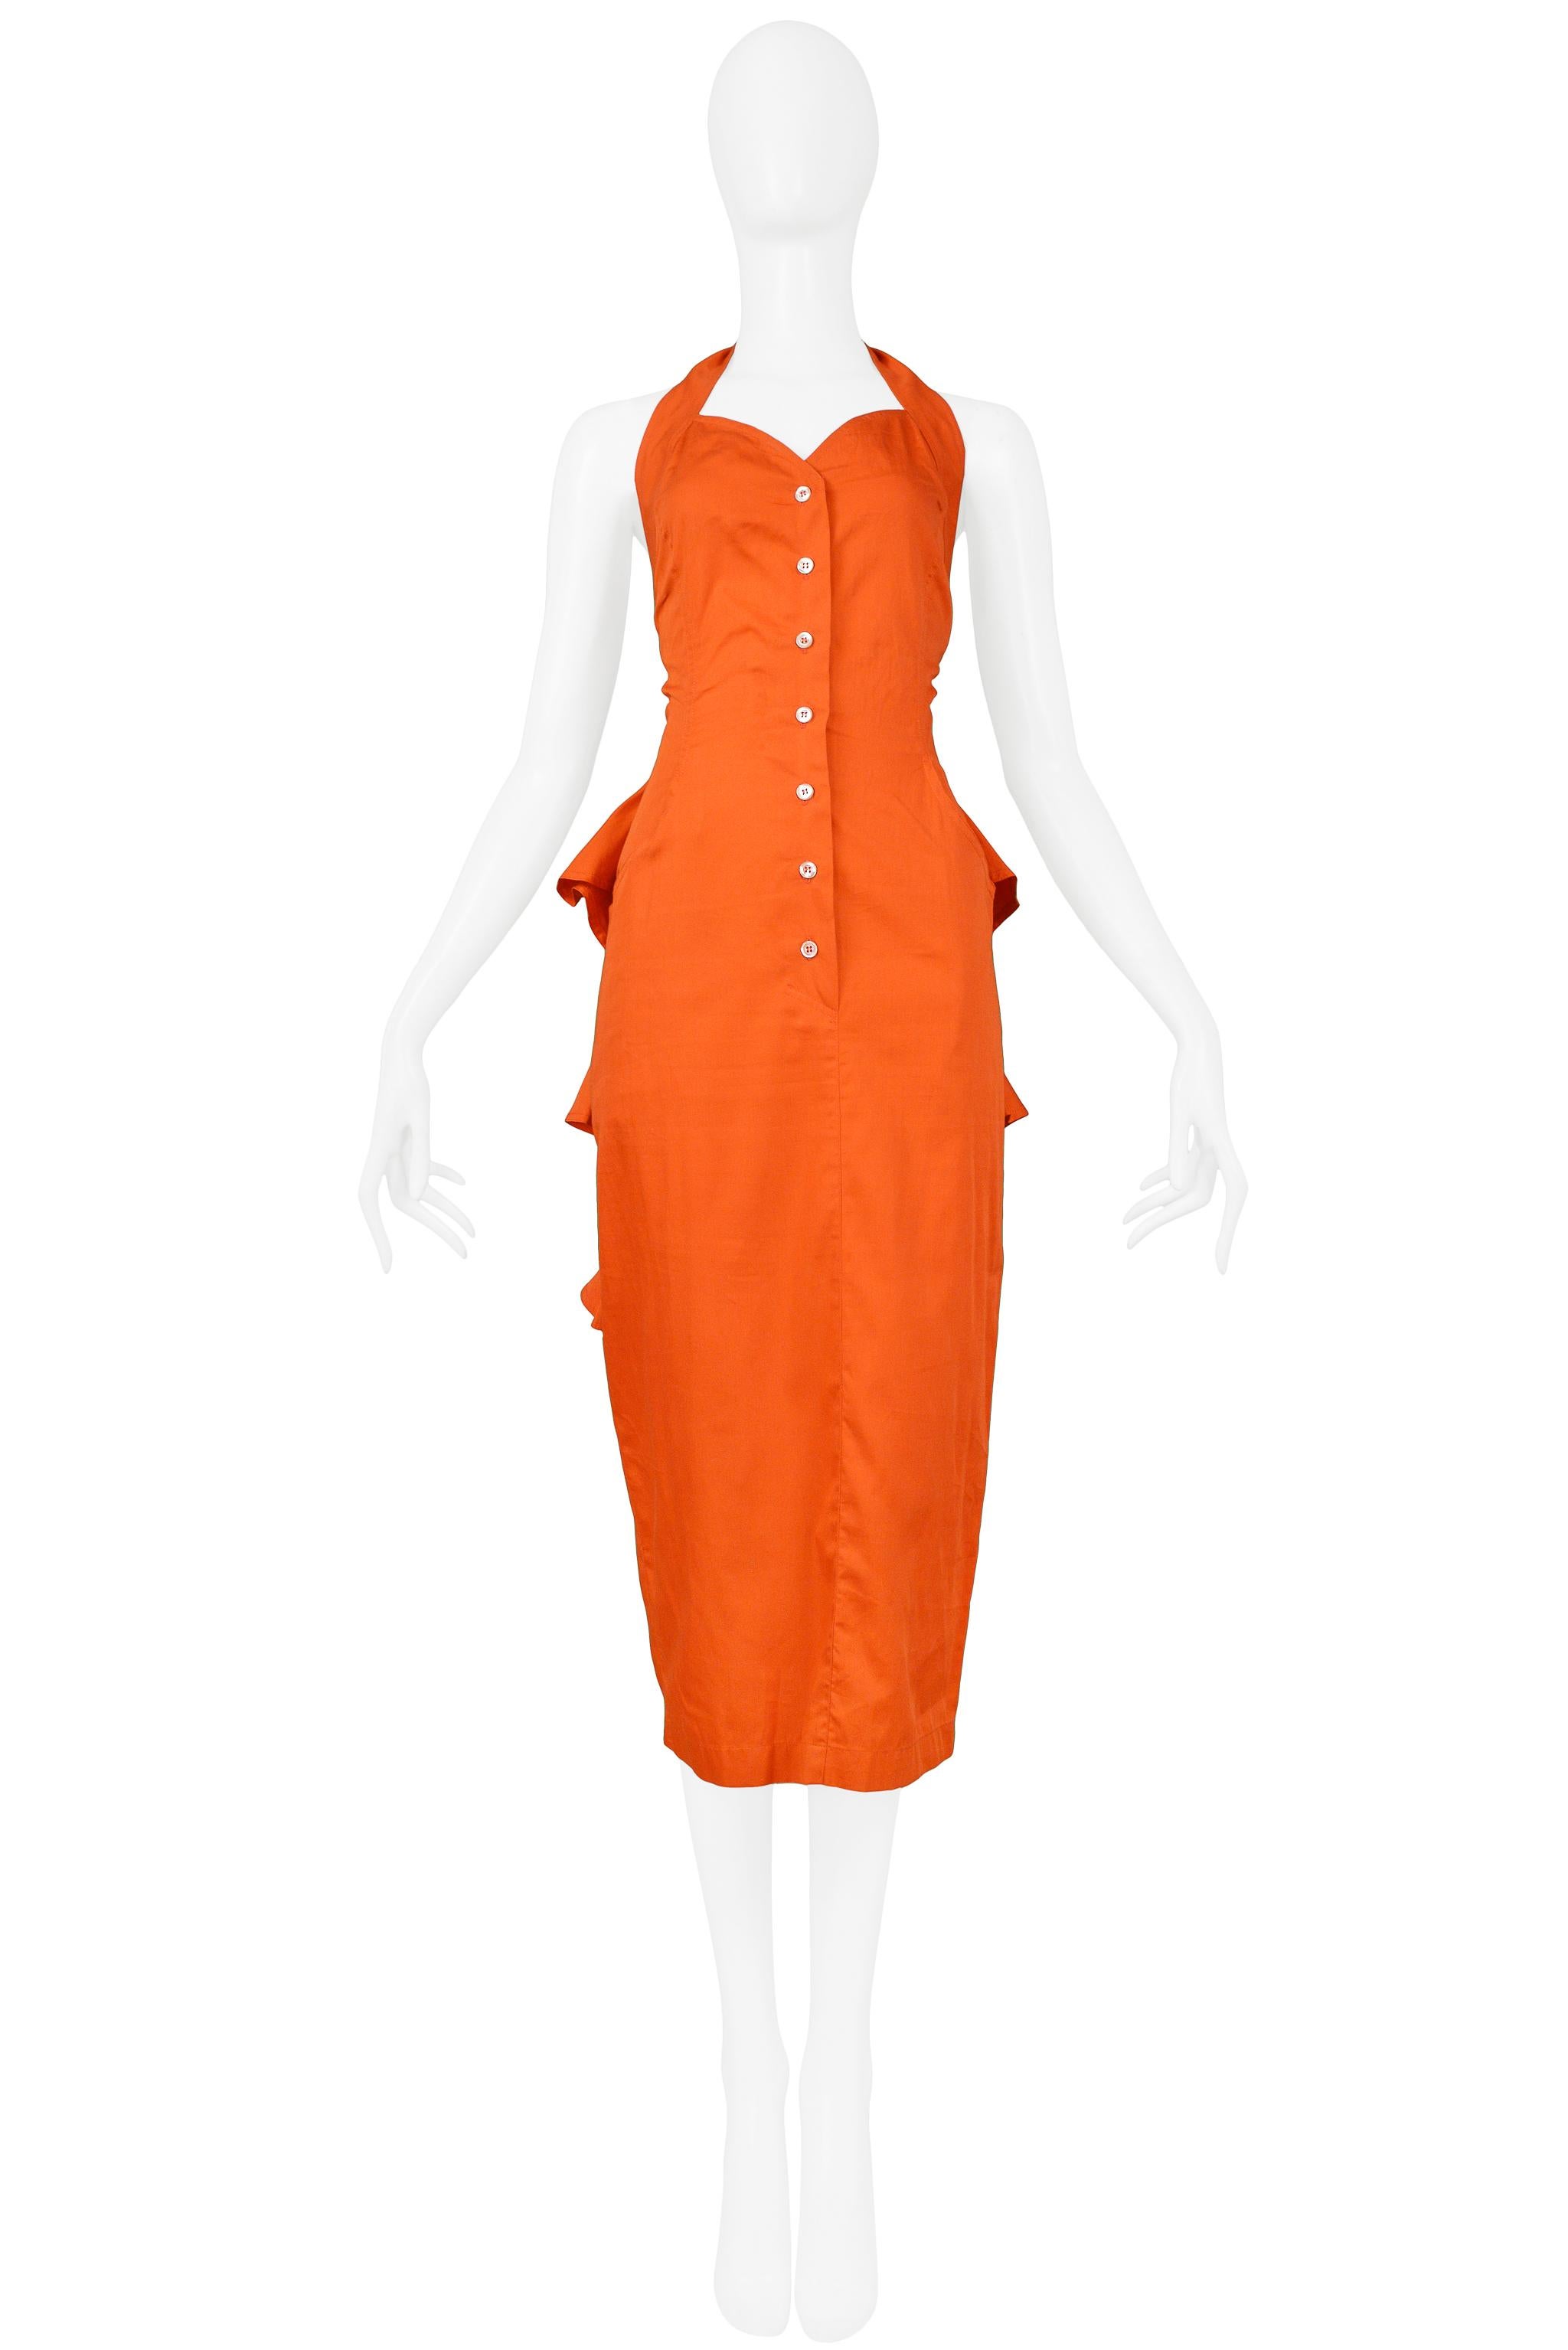 Resurrection Vintage is excited to offer a vintage Byblos bright red-orange Byblos cotton halter dress with a flat front, buttons, halter strap, and skirt with ruffles at back and sides. 

Byblos
Designed by Alan Cleaver and Keith Varty
Size